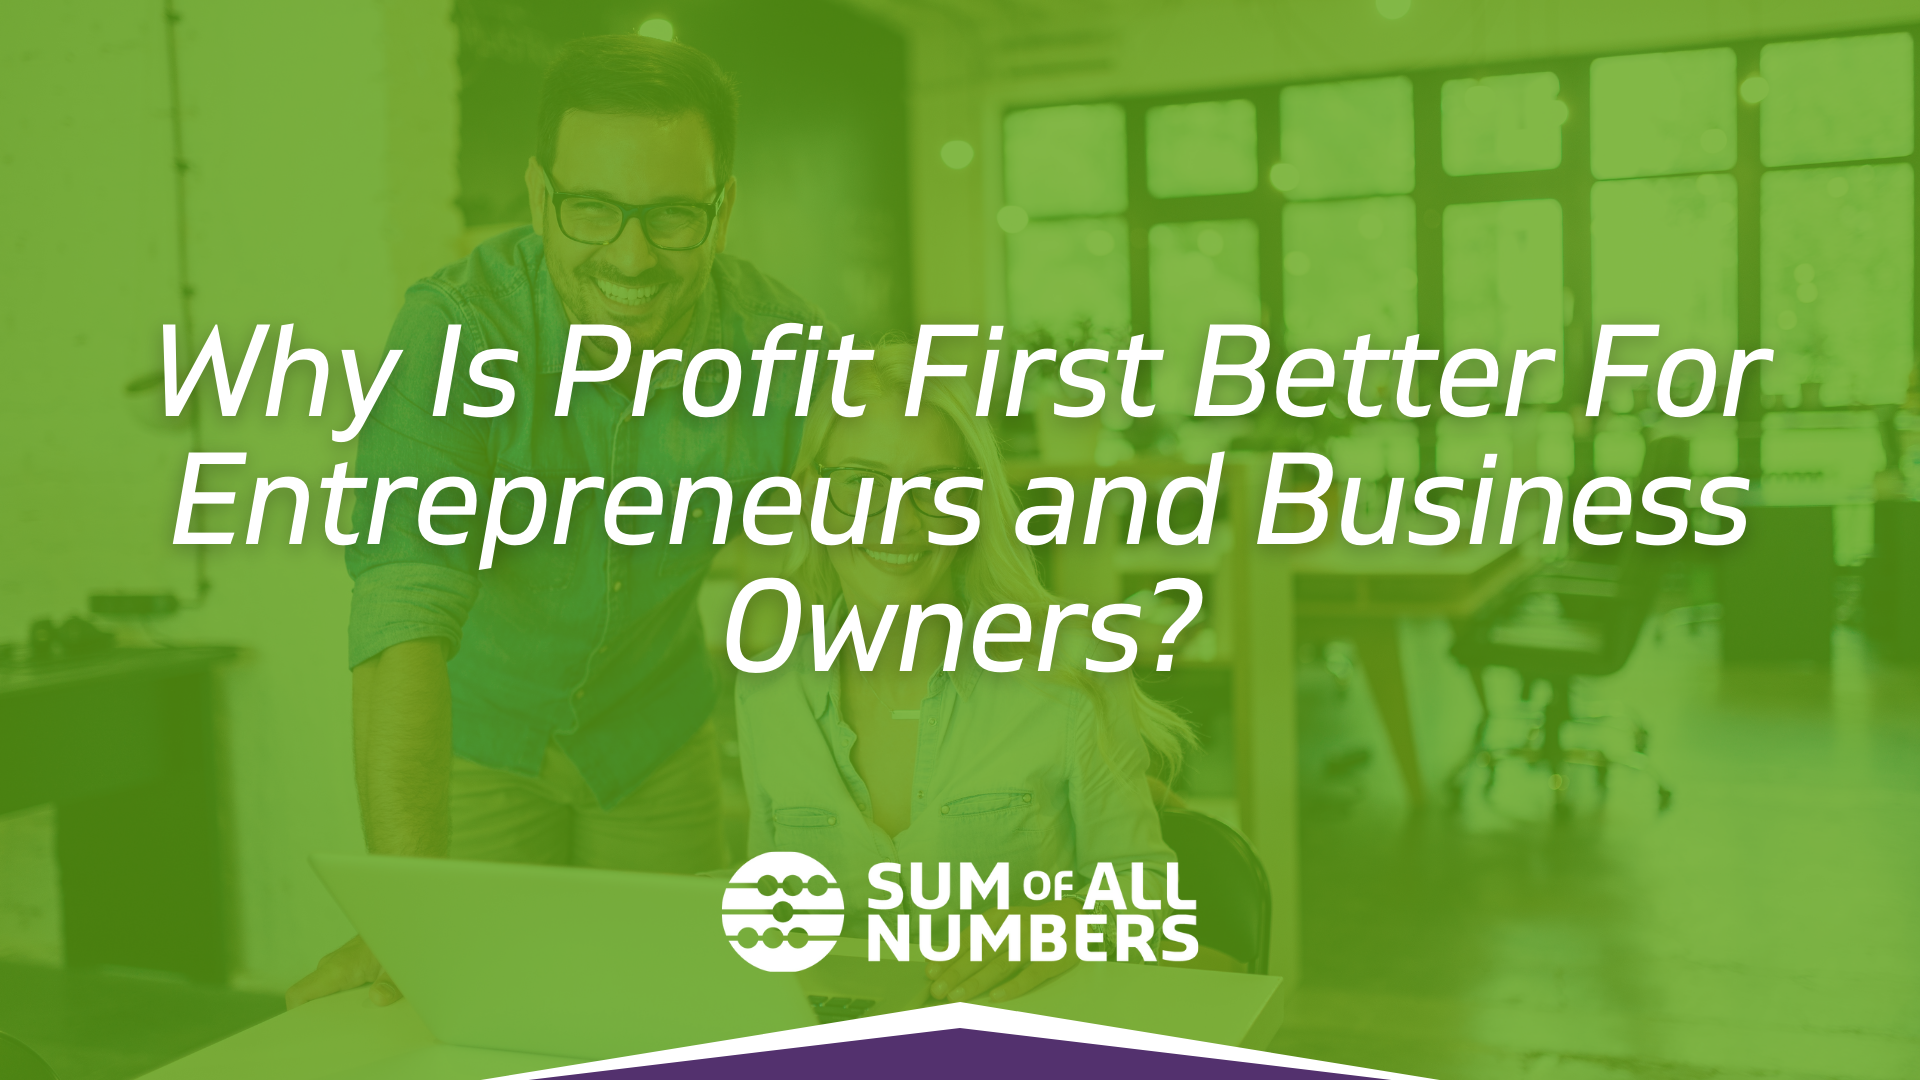 Our featured image for the blog post “Why Is Profit First Better For Entrepreneurs?” | sumofallnumbers.com